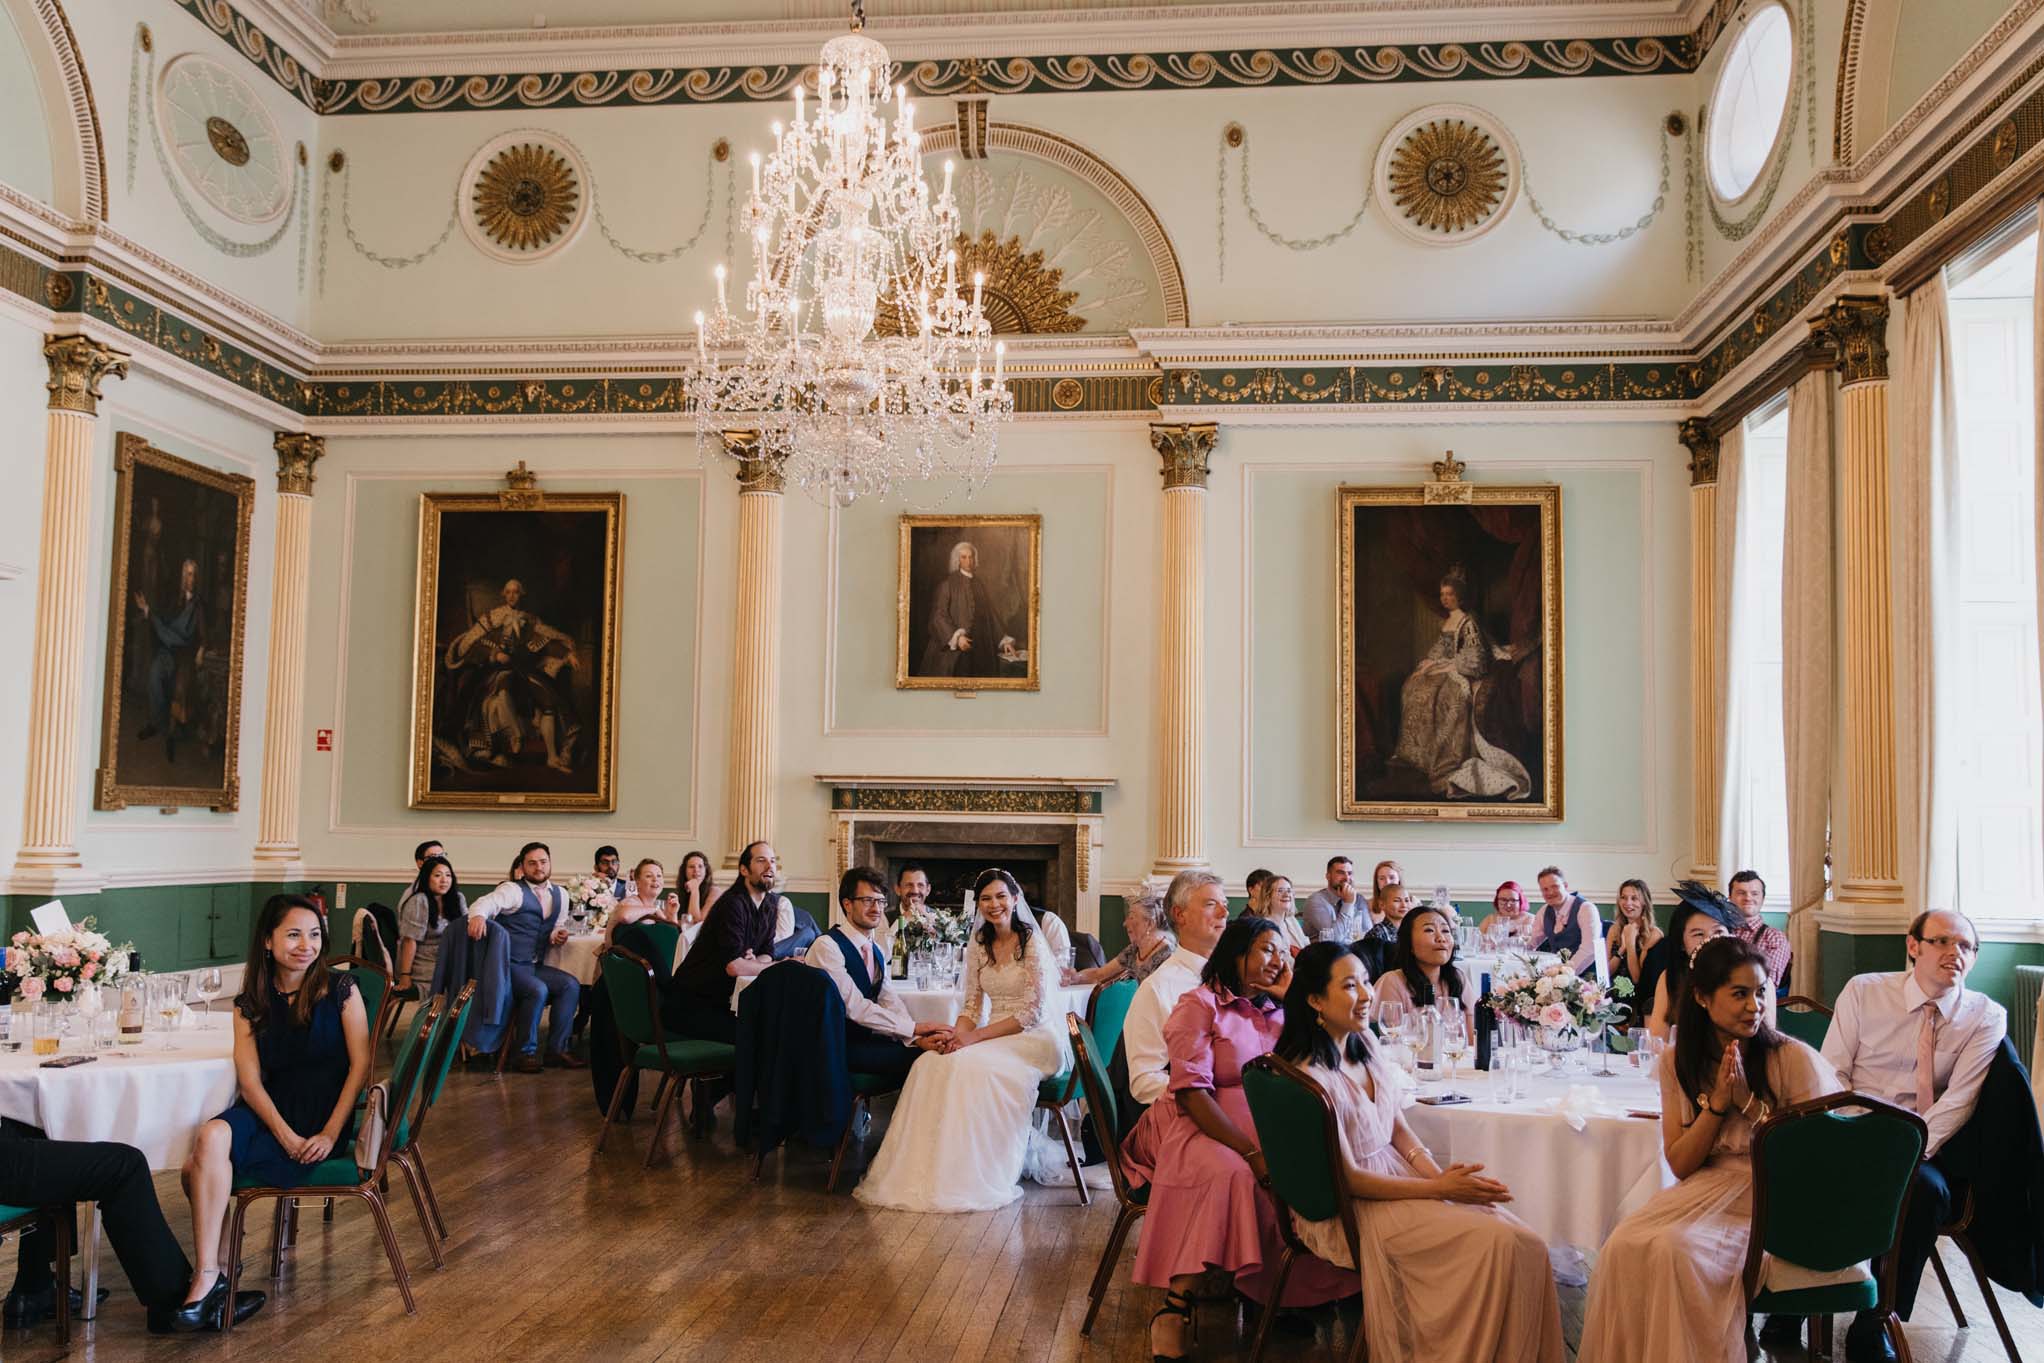 Wedding reception in the Banqueting Room